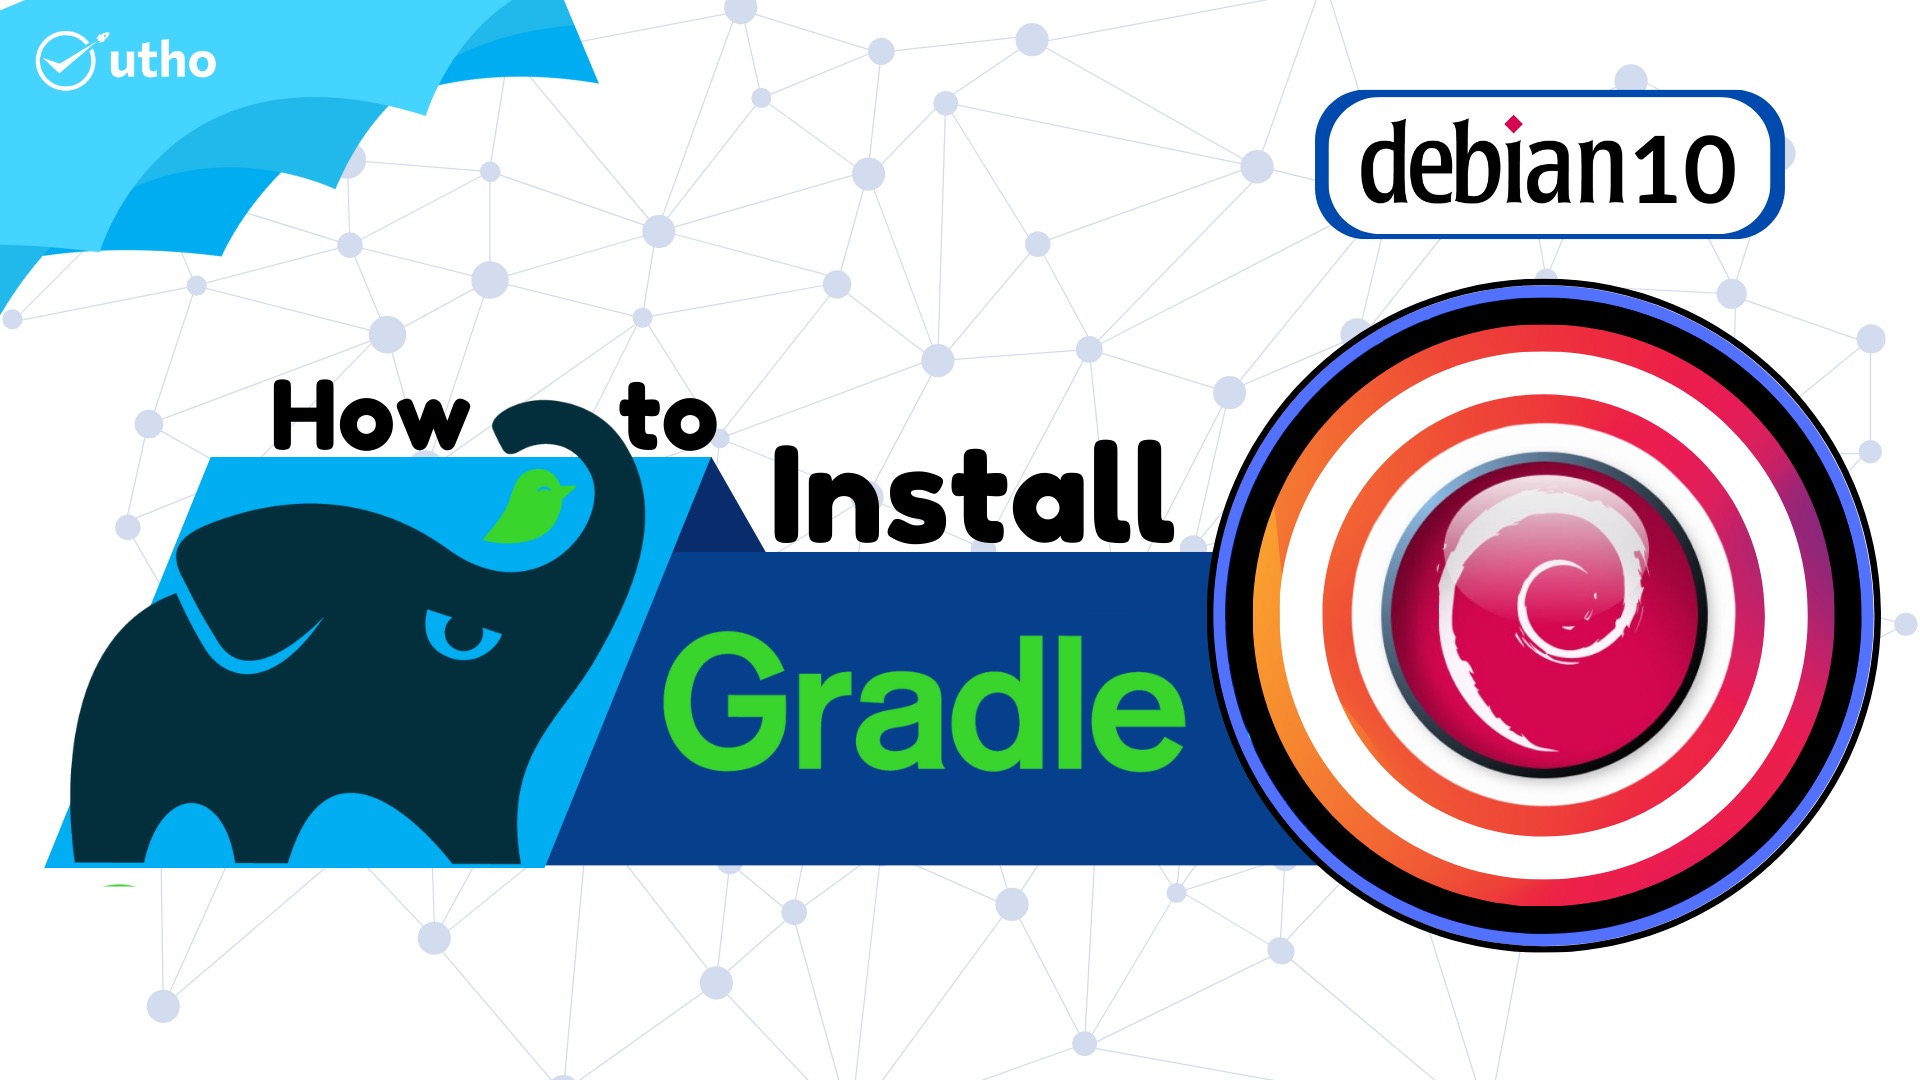 How to install Gradle on Debian 10